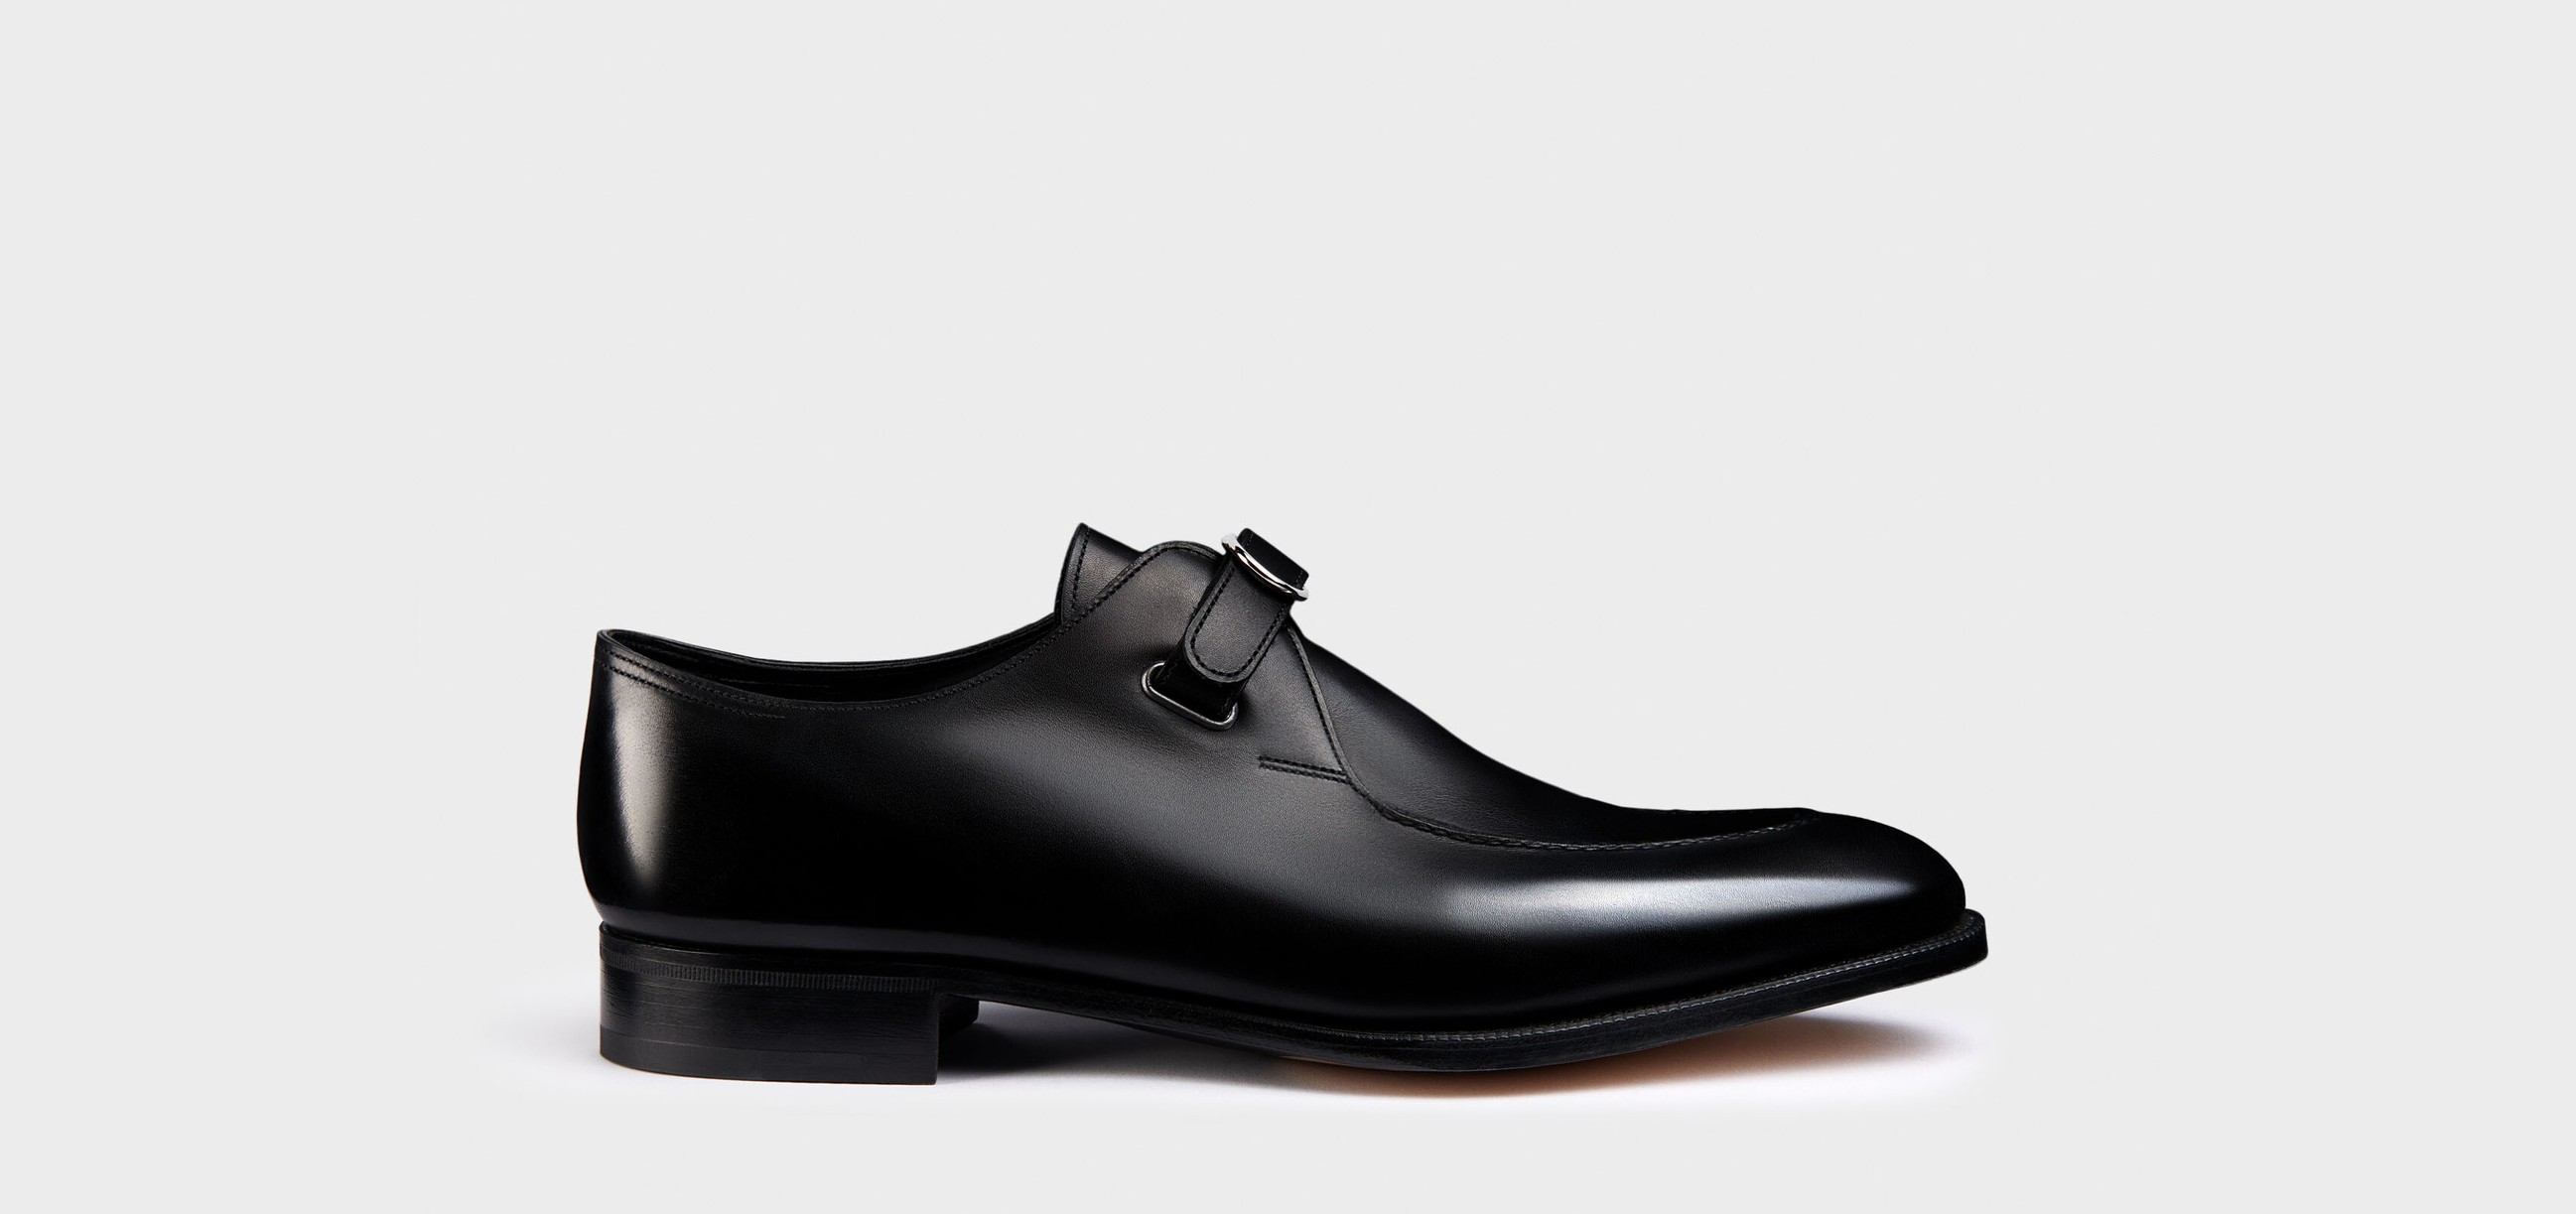 John Lobb | Liverpool | The whole collection